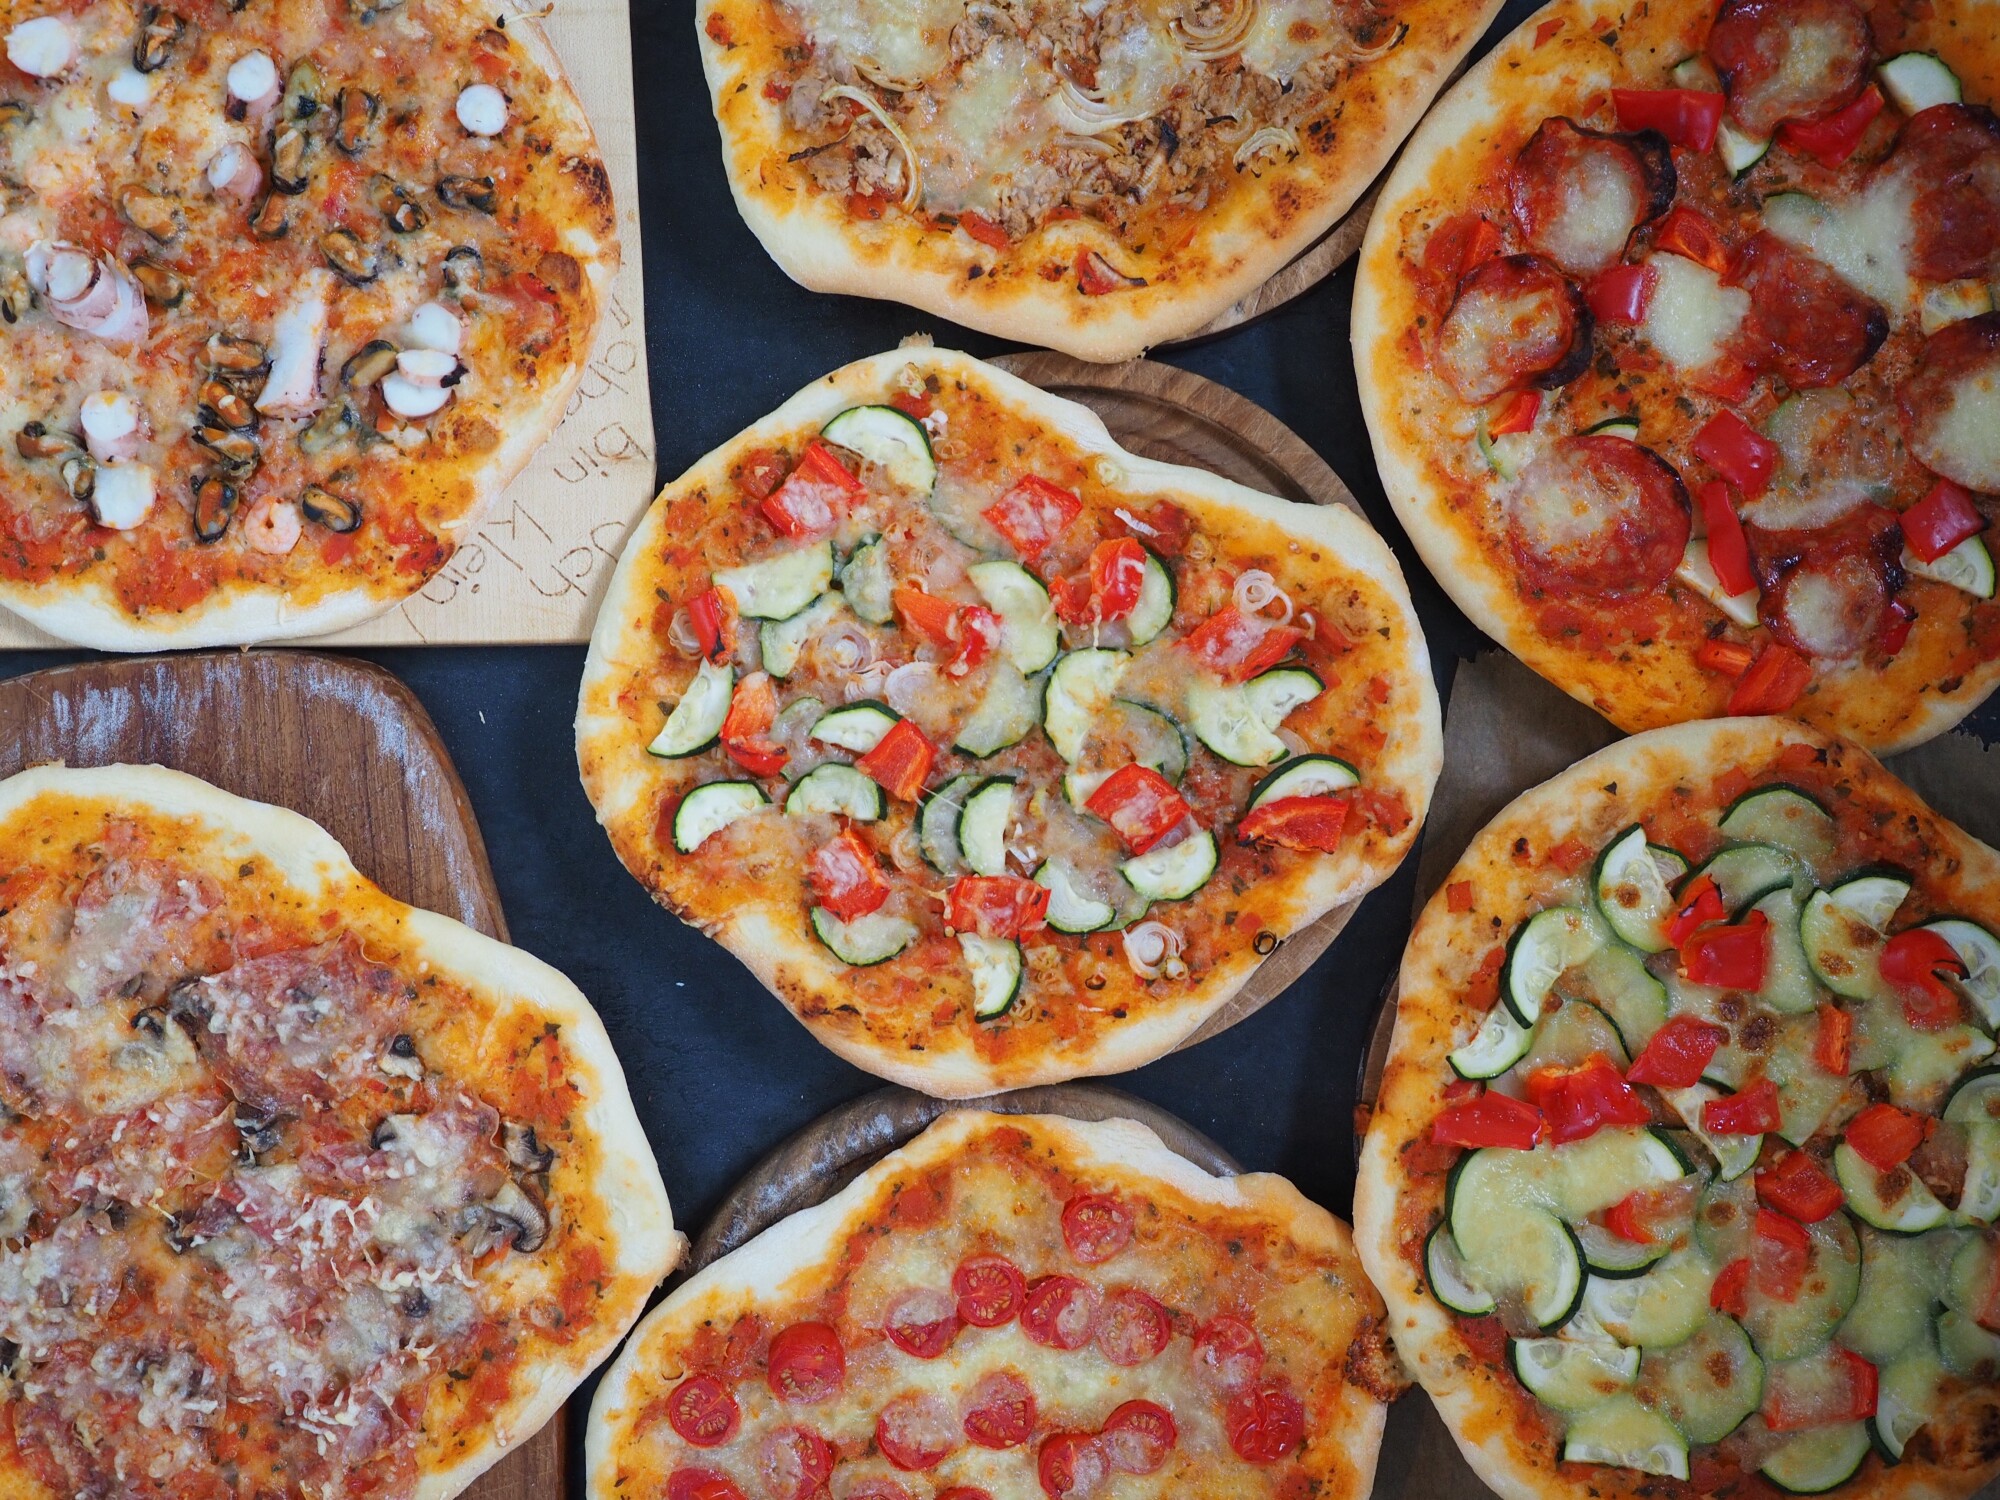 Billy strække Tidsserier The Absolute Best Pizza Topping Combos You Need to Try